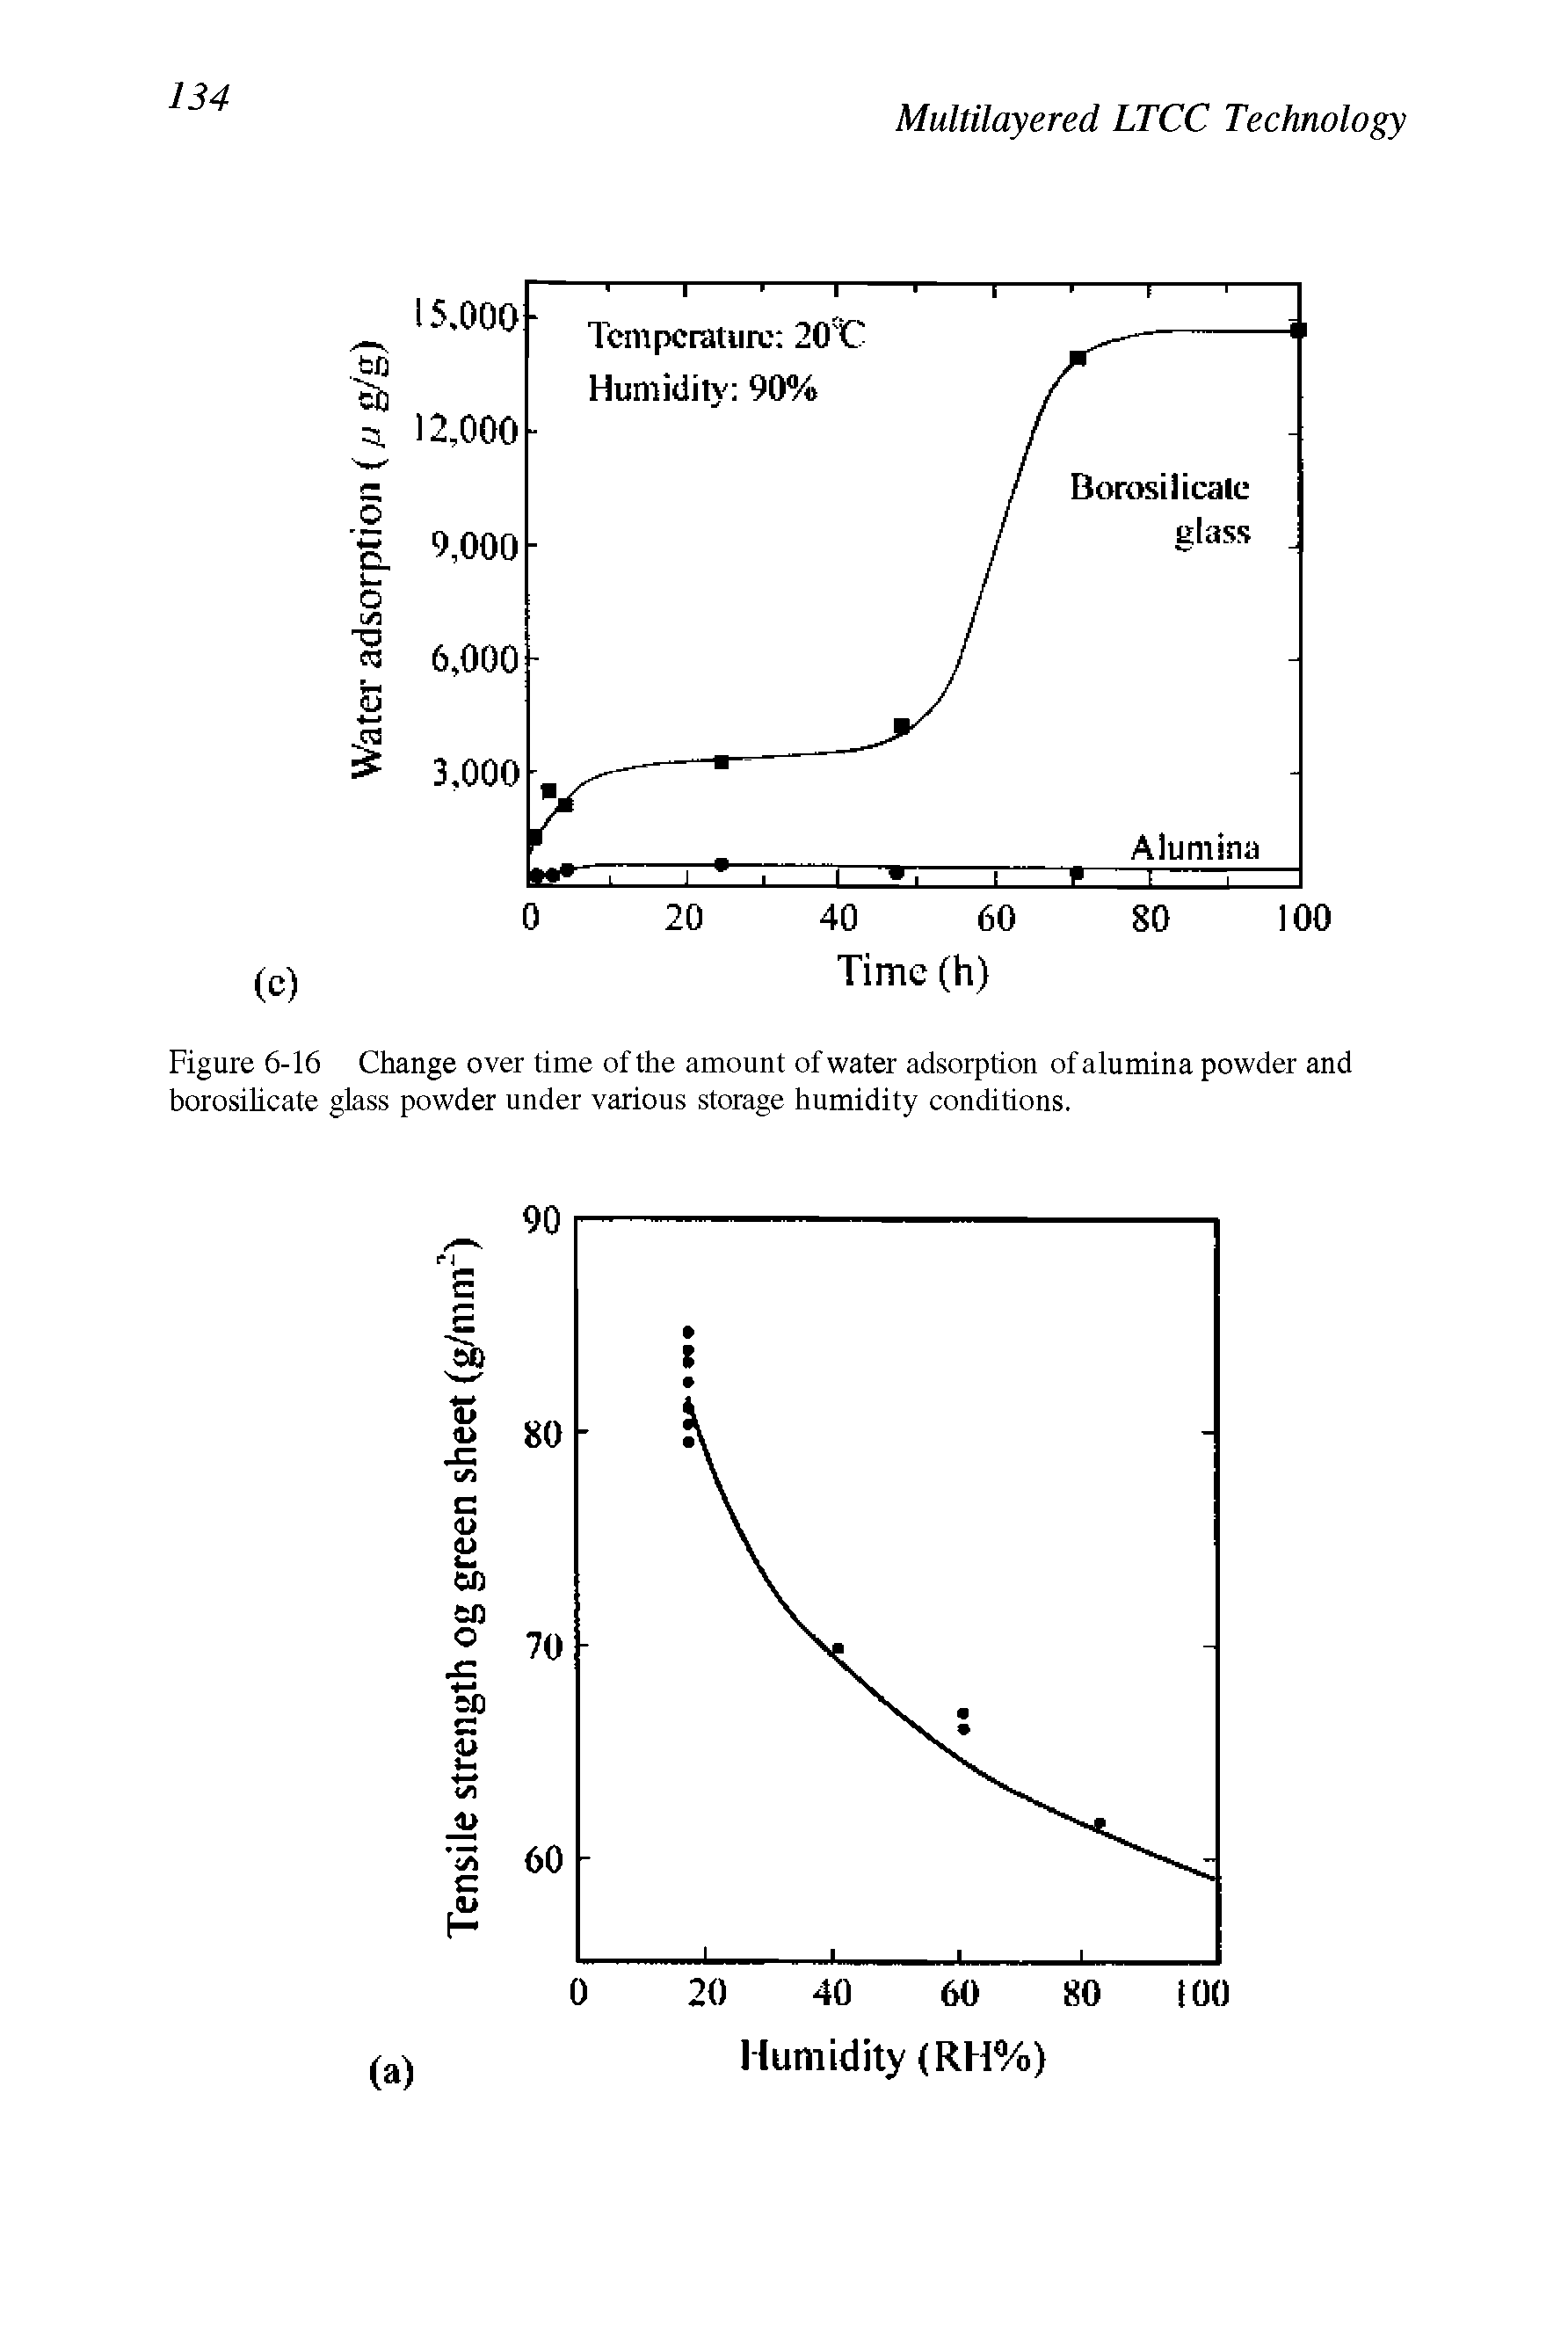 Figure 6-16 Change over time of the amount of water adsorption of alumina powder and borosihcate glass powder under various storage humidity conditions.